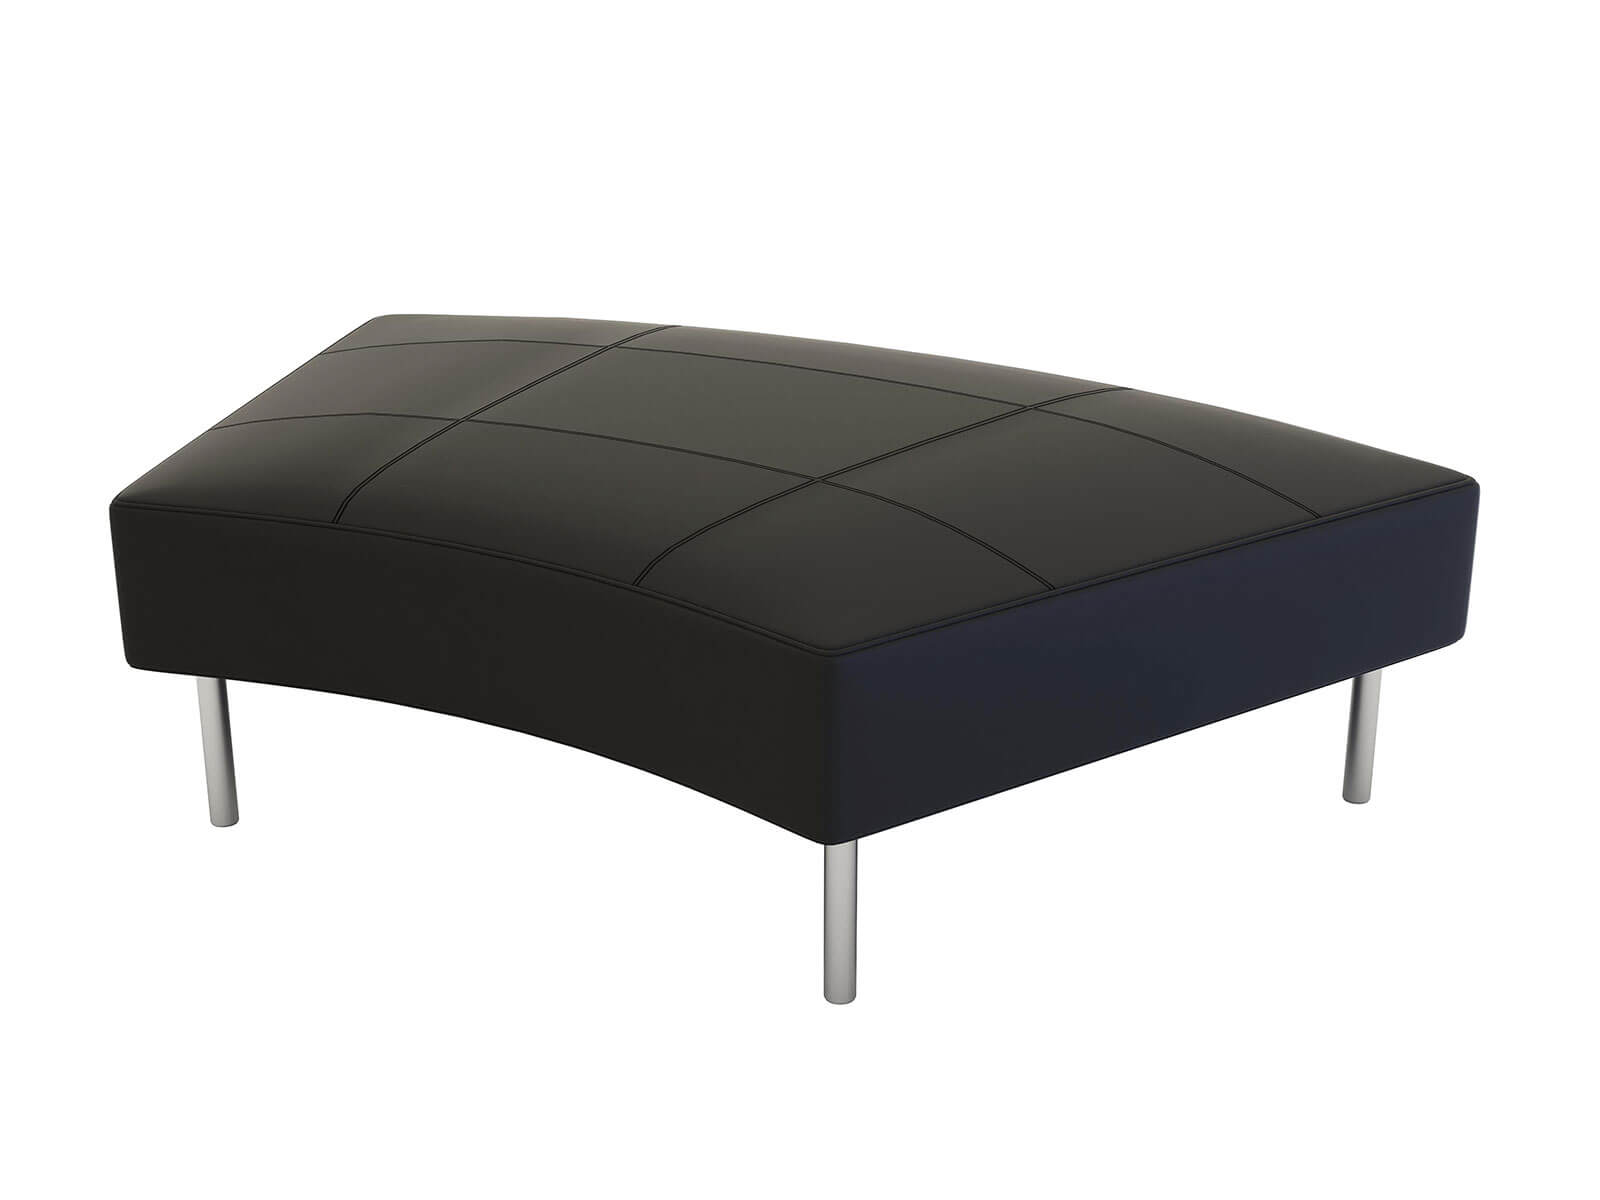 CEOT-023 Curved Ottoman